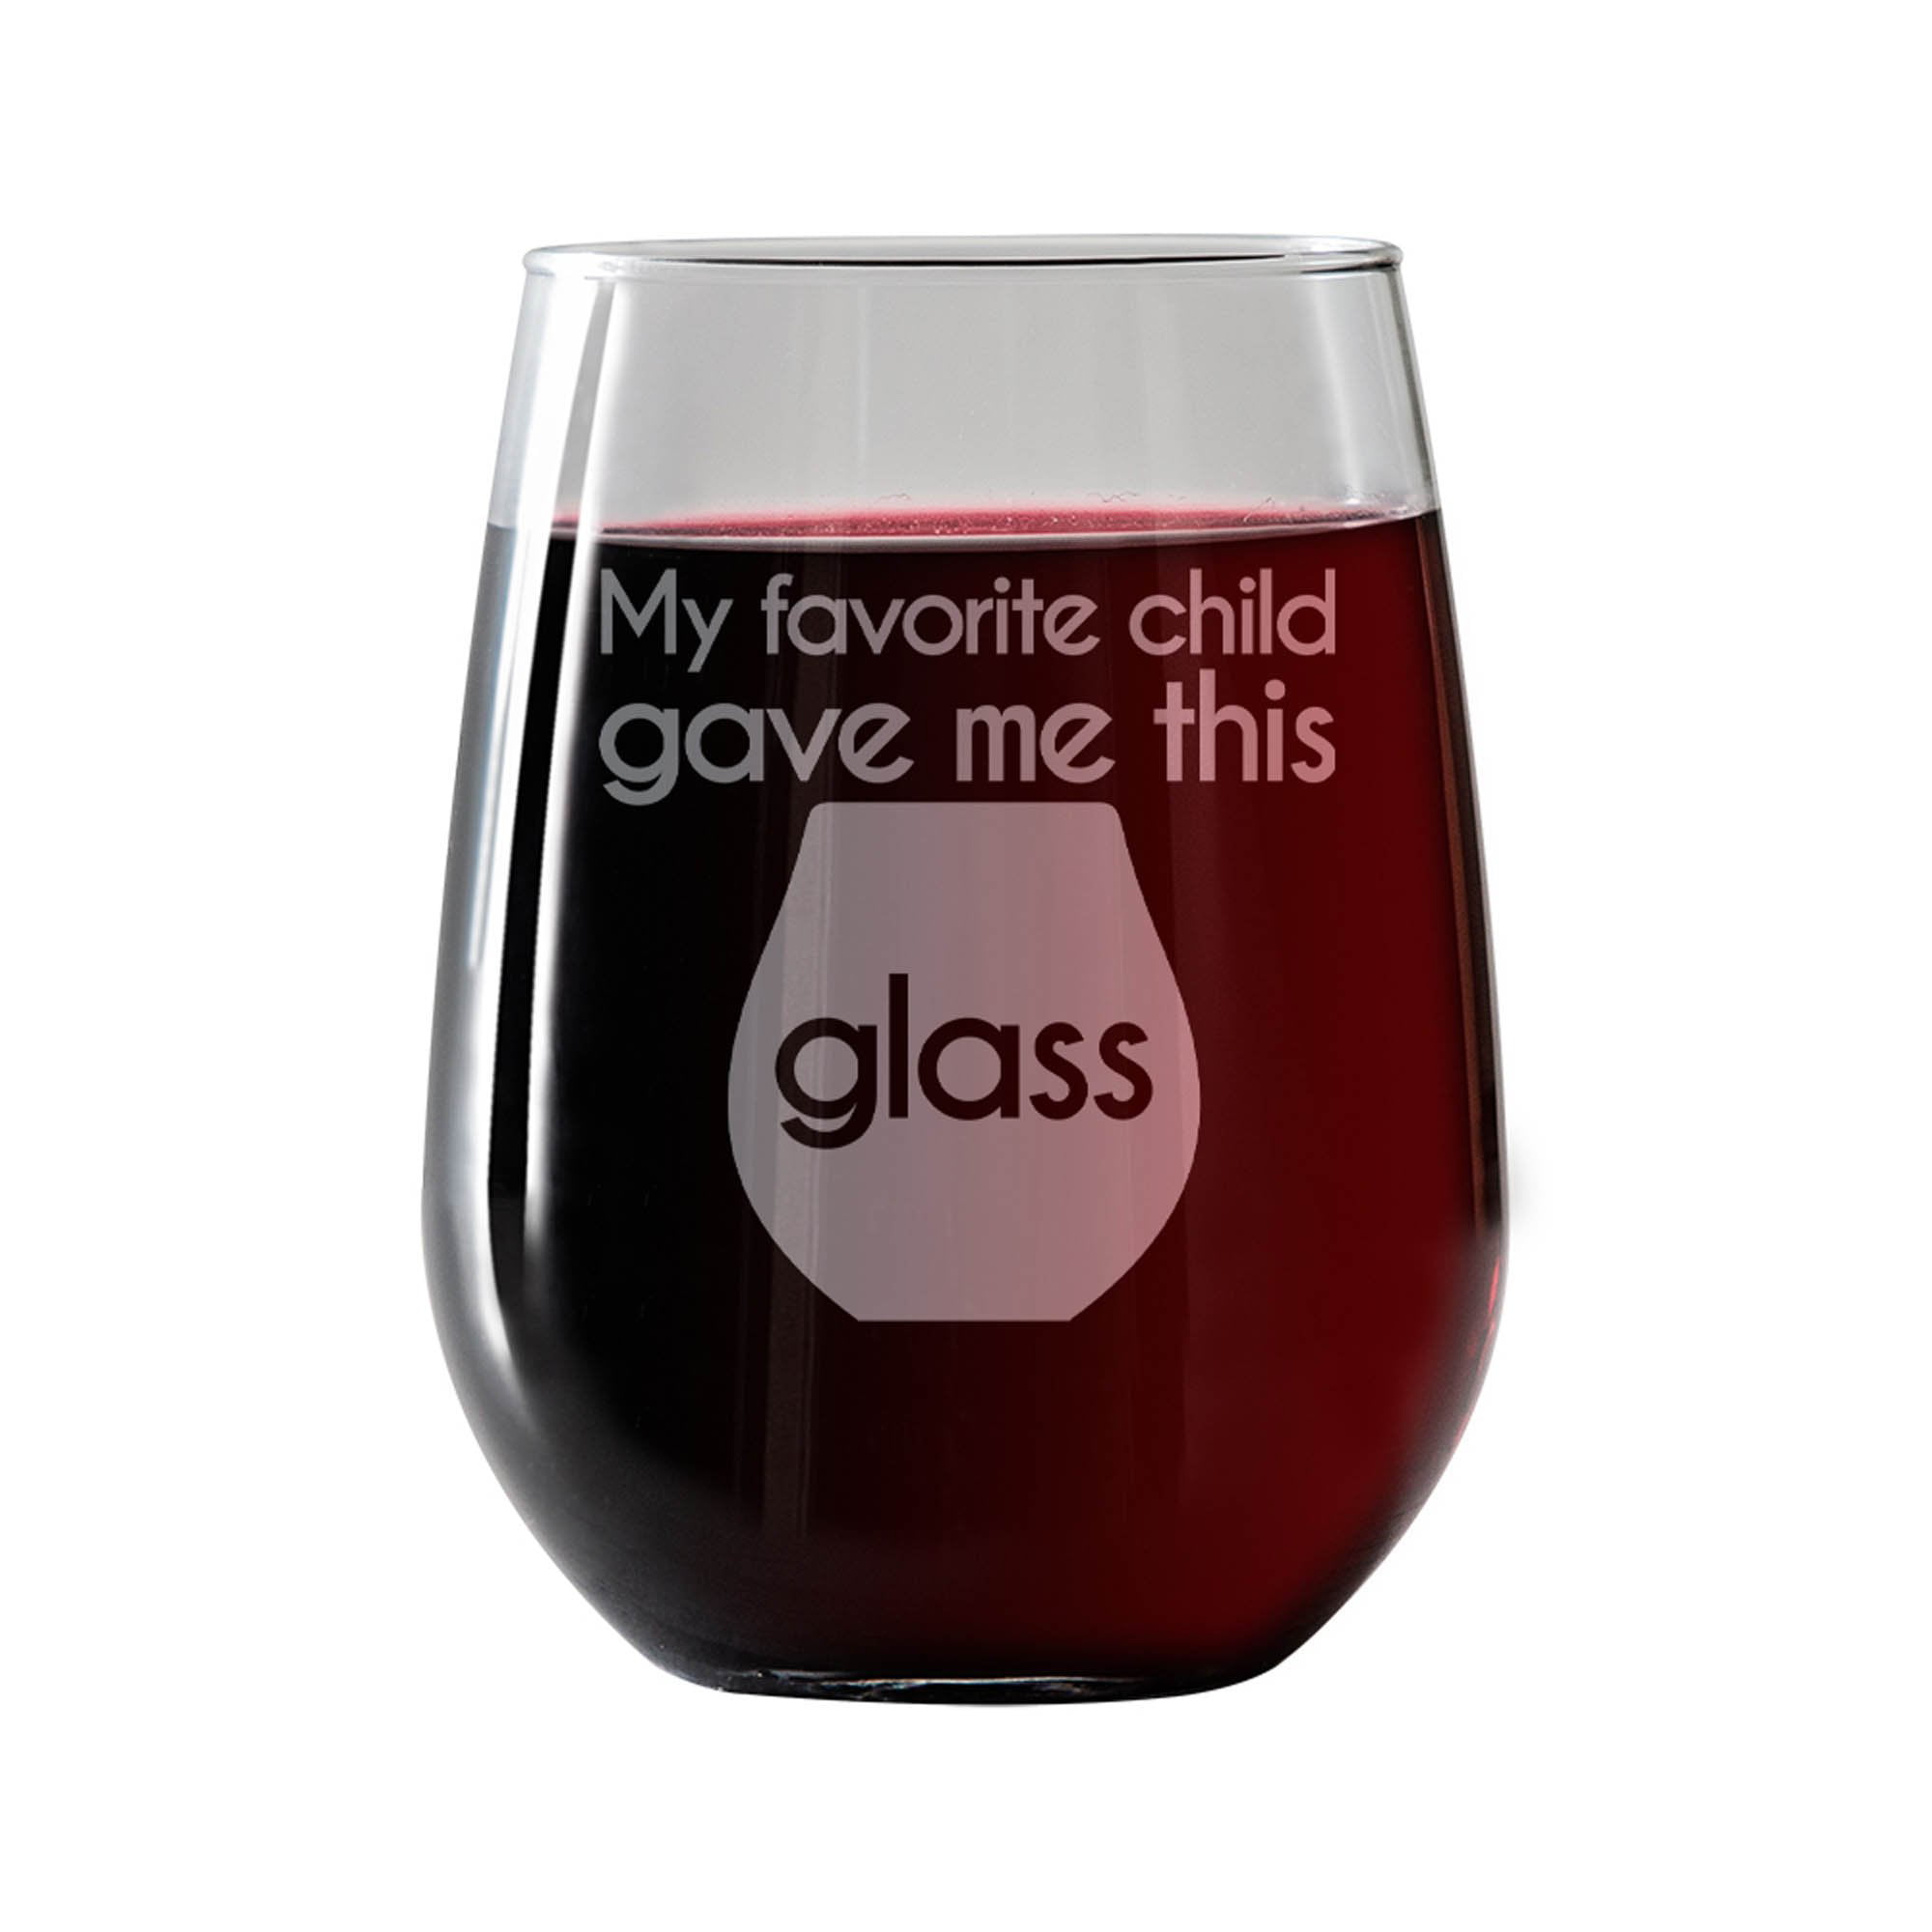 15 OZ Funny Unique Novelty Stemless Wine Glass for Christmas Mother’s Day Gifts For Mom From Daughter or Son Mom’s Birthday or Just Because She’s The Best Mom Ever